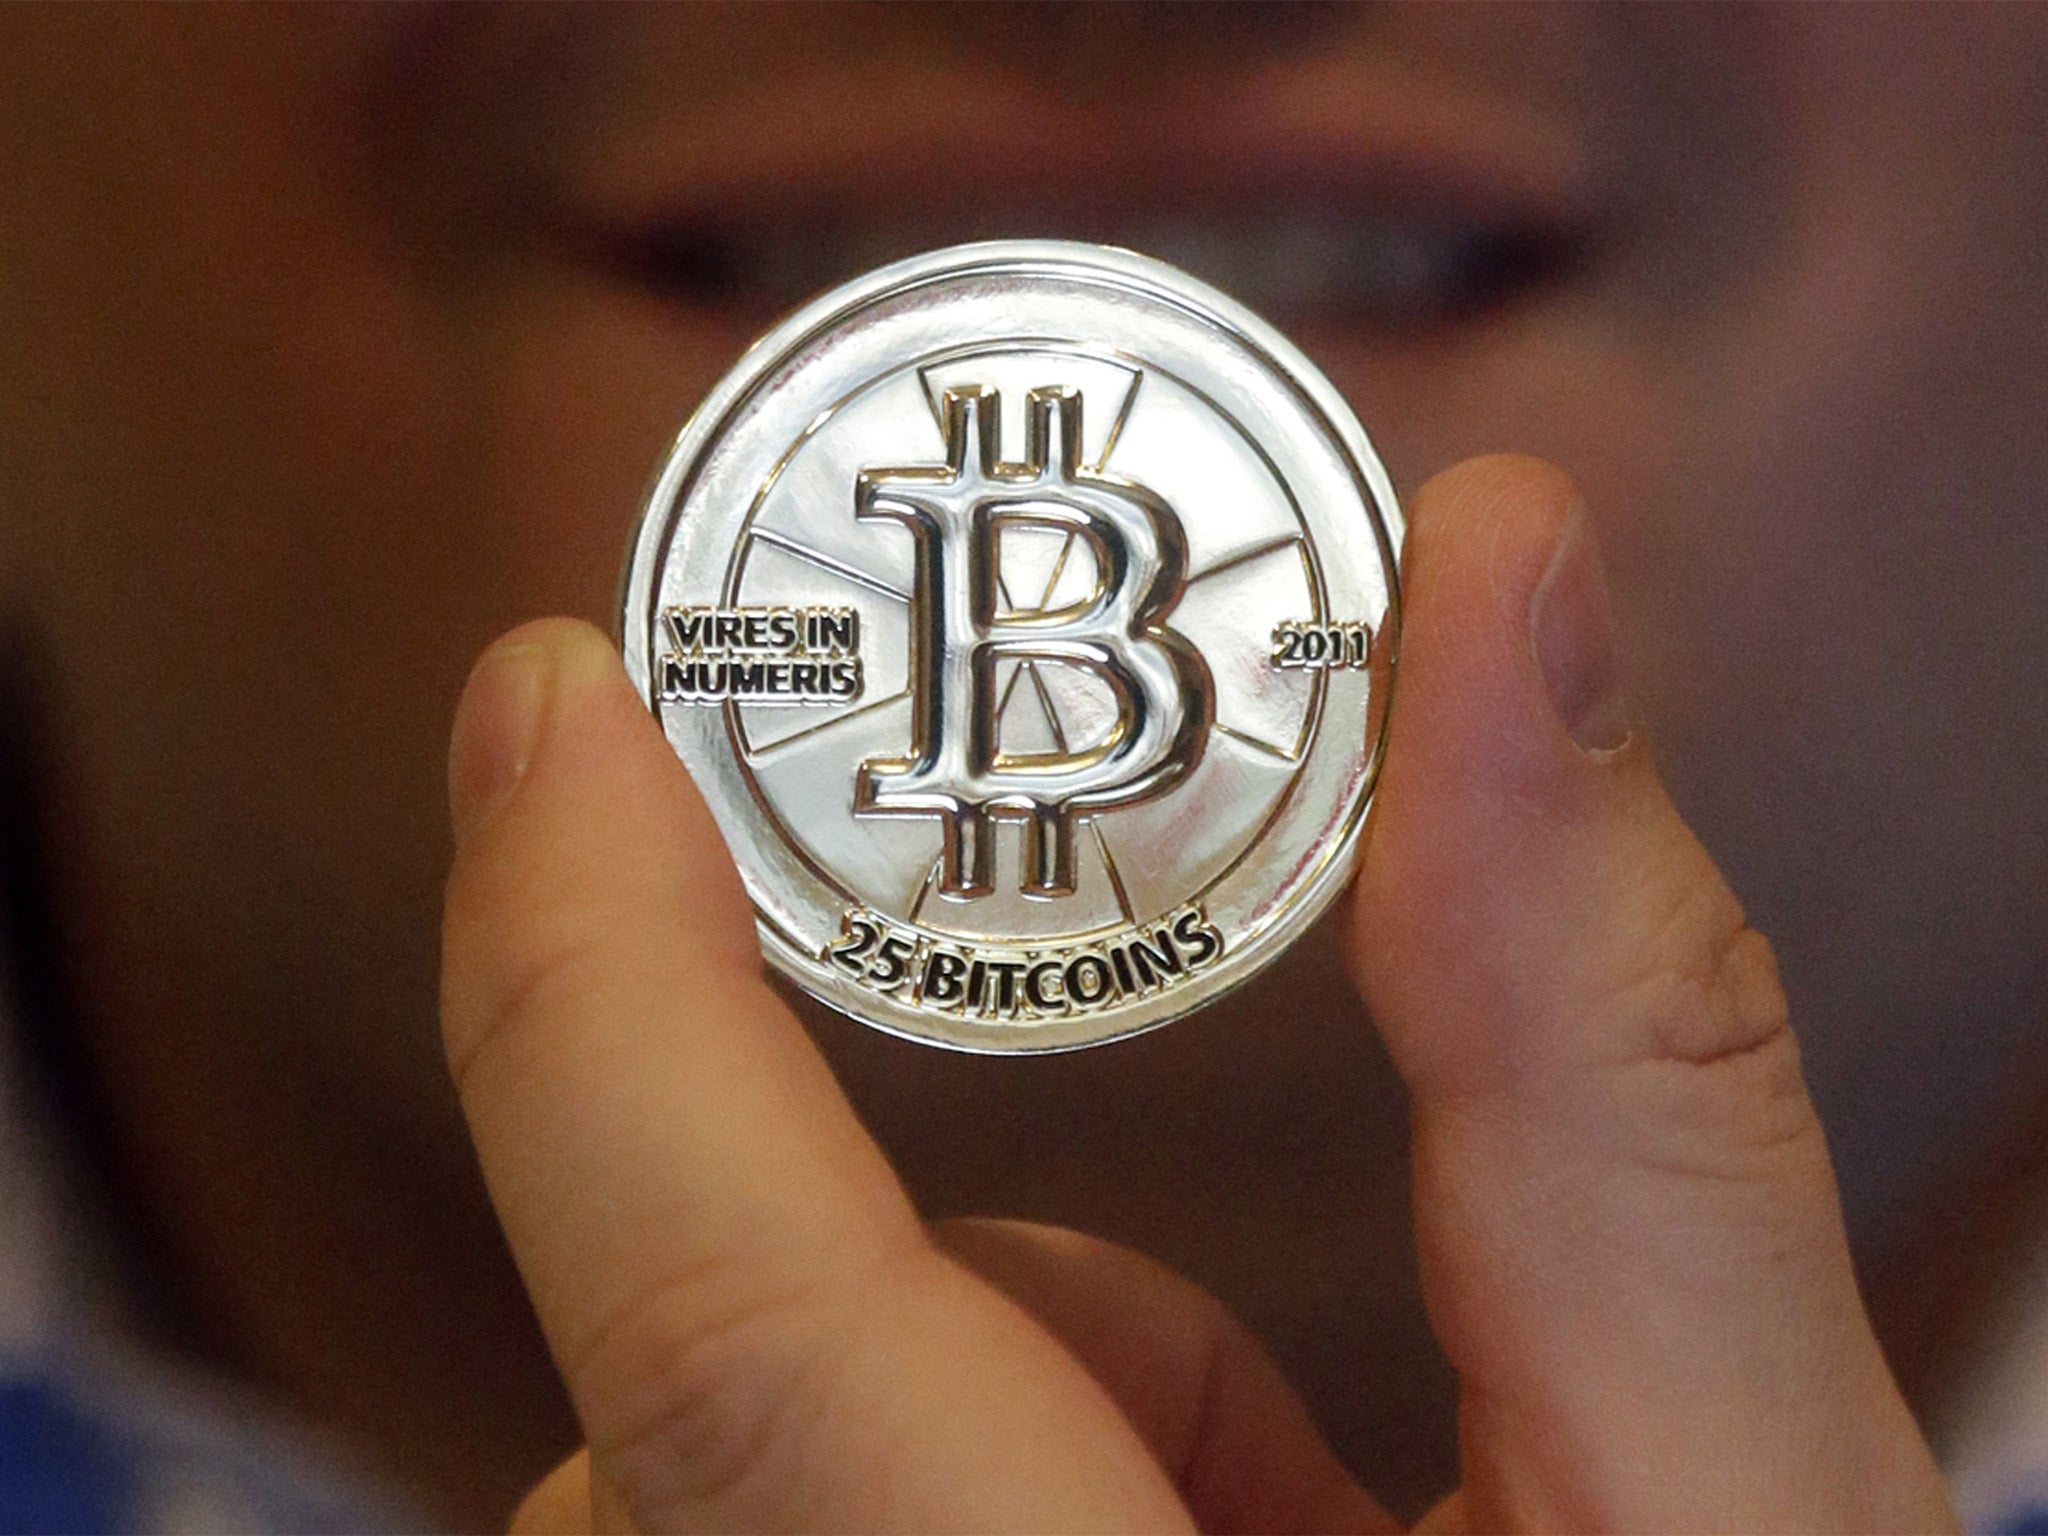 Bitcoin, the online cryptocurrency, was first developed in 2008